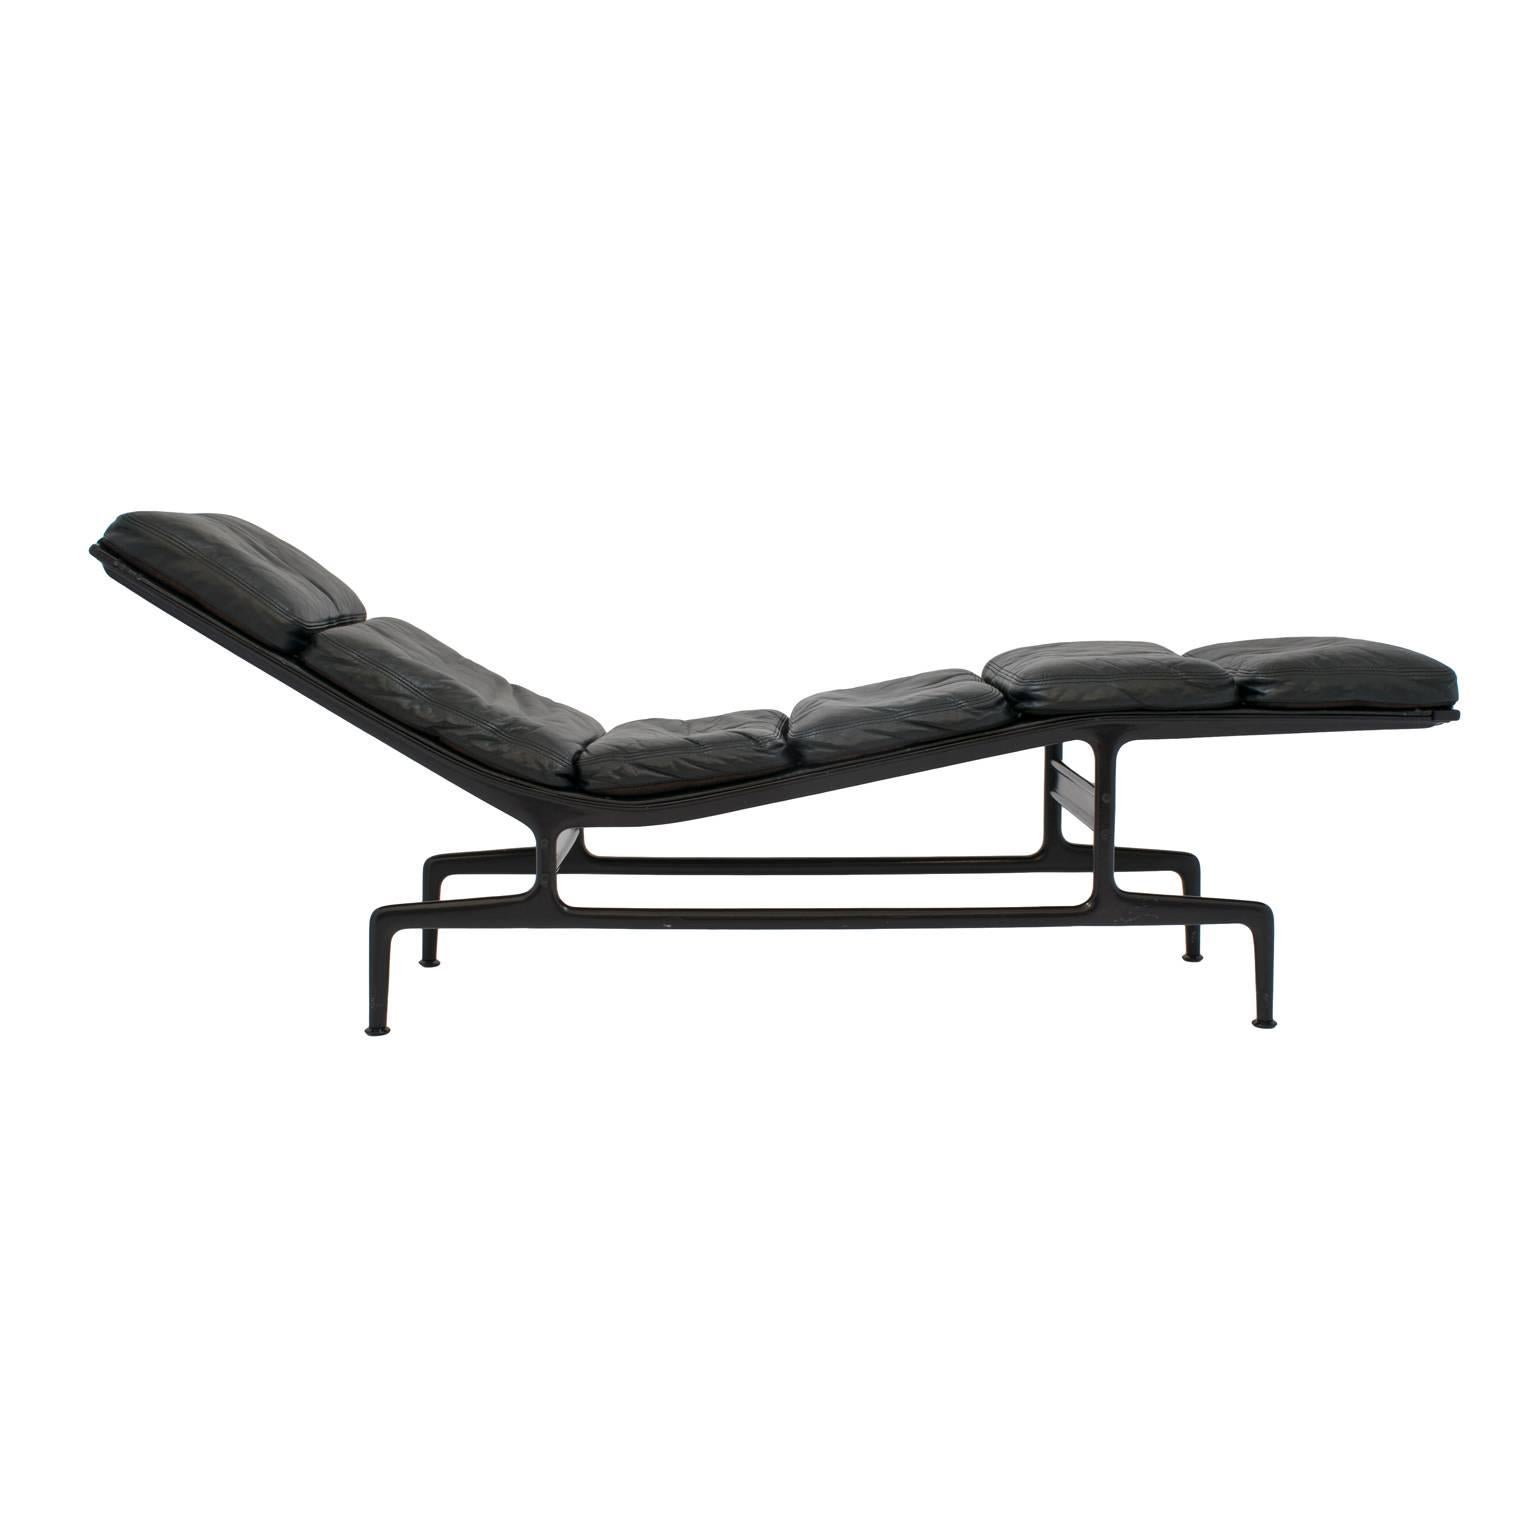 Minimalist and modernist Charles Eames chaise in black for Herman Miller, designed in 1968 for filmmaker Billy Wilder. This is an early production Eames chaise with black leather cushions on a black die-cast aluminium frame. The chaise features 6